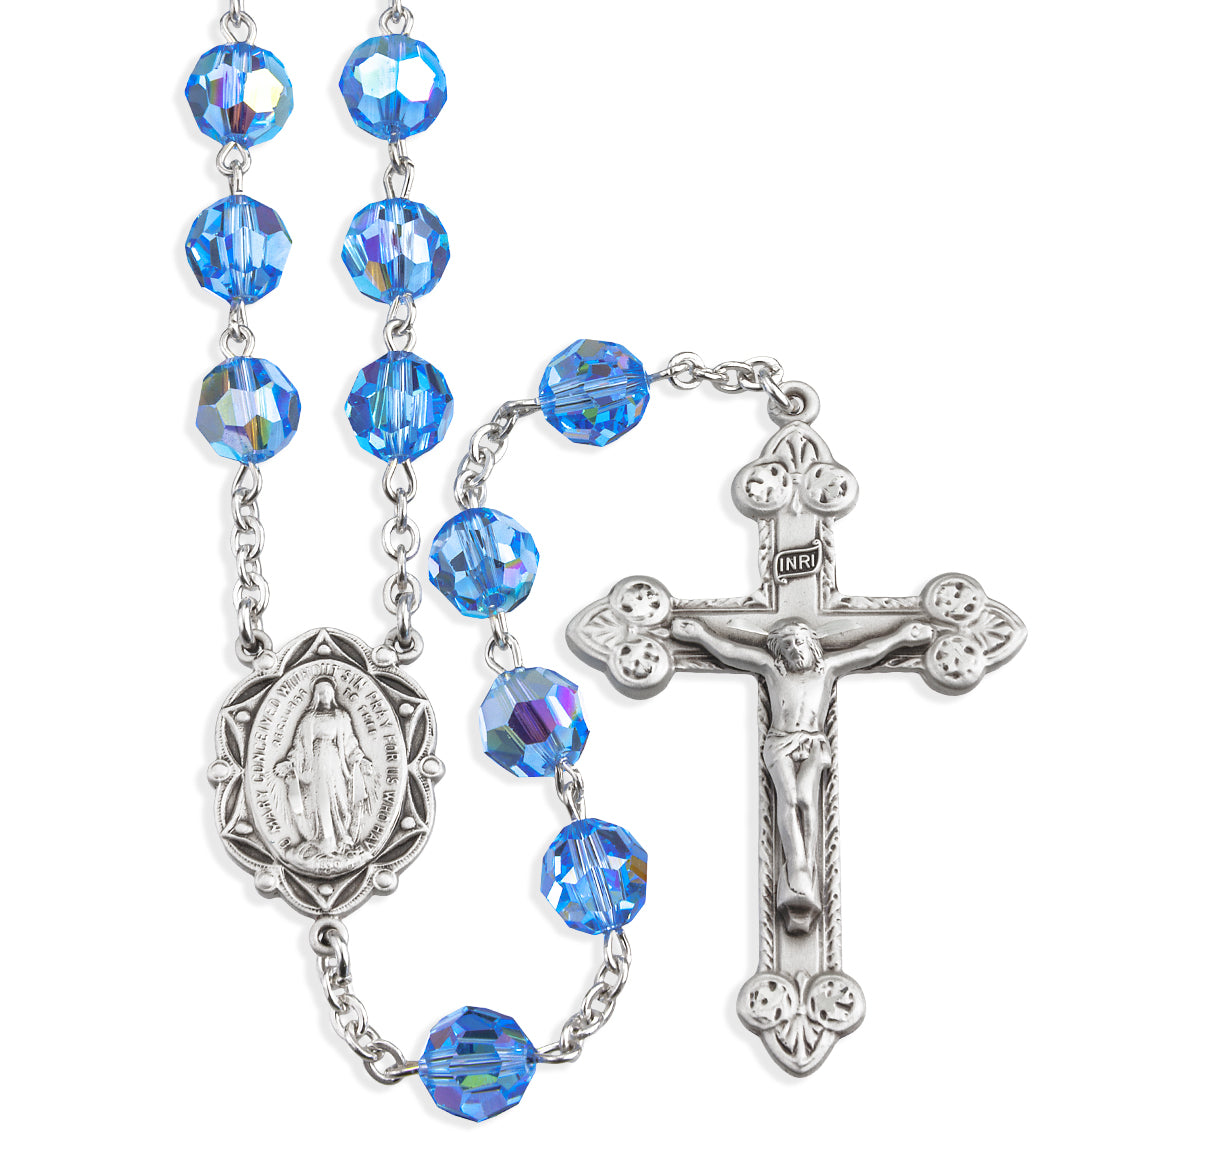 Sterling Silver Rosary Hand Made with finest Austrian Crystal 8mm Light Sapphire Beads by HMH